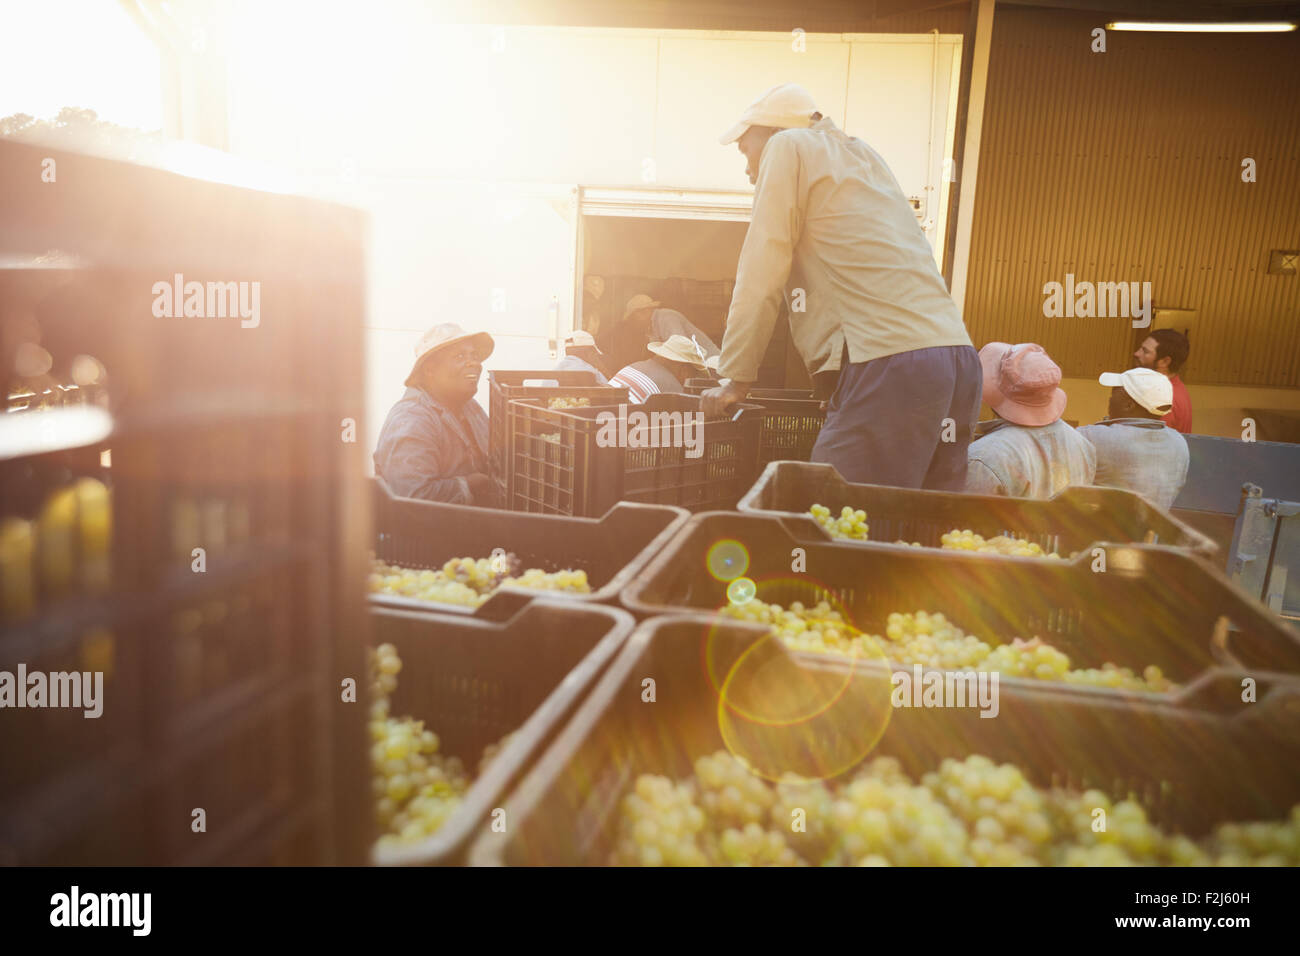 Harvested green grapes in boxes ready to unload at the wine factory for making wine. Vineyard workers working in wine factory. Stock Photo